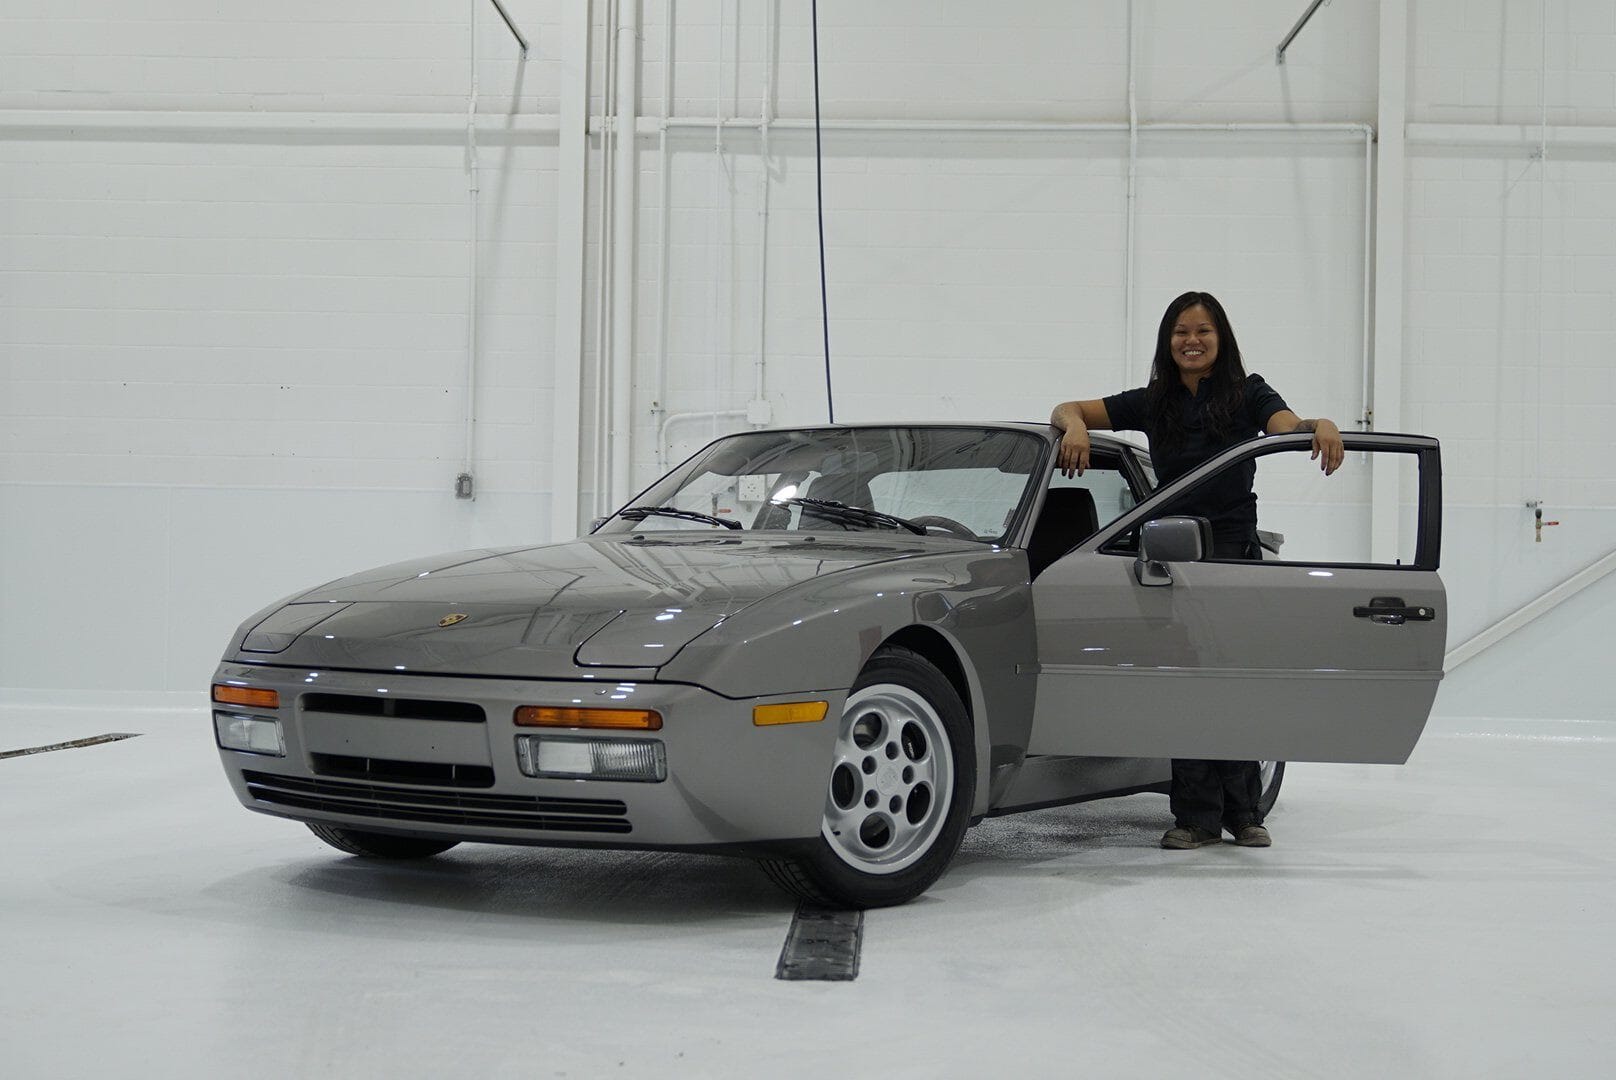 Nhu Nguyen, the first woman certified as a classic Porsche technician in North America